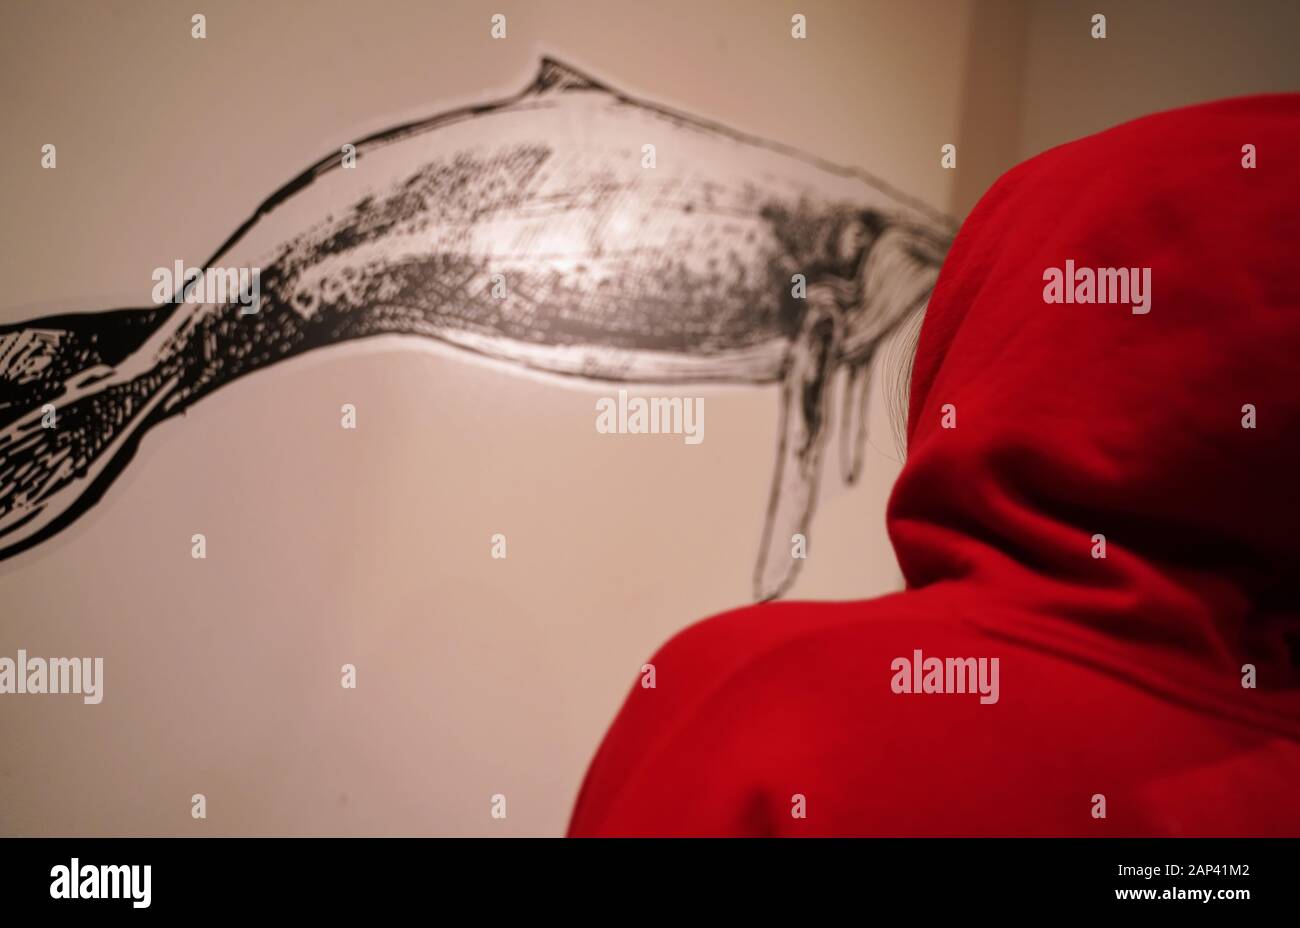 Young person in a red hooded sweater looking at an illustration of a Humpback whale on wall. Stock Photo